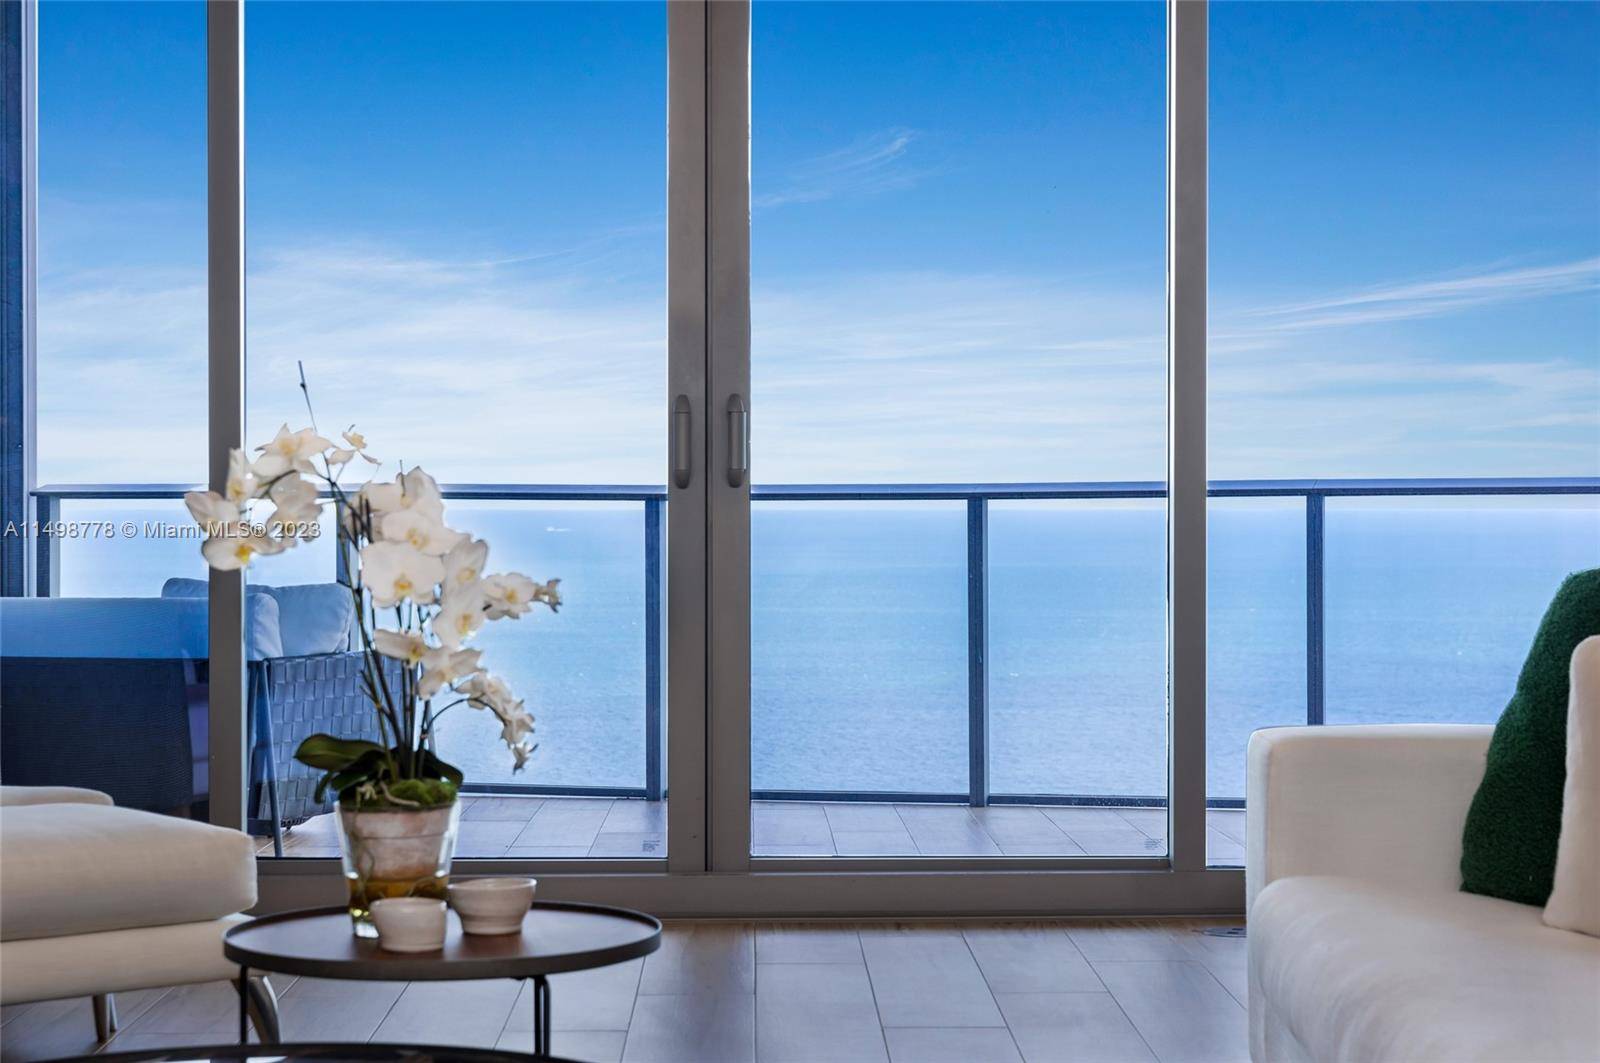 Introducing an exquisite unit at the Ritz Carlton in Collins Av nestled within the prestigious enclave of Sunny Isles Beach.